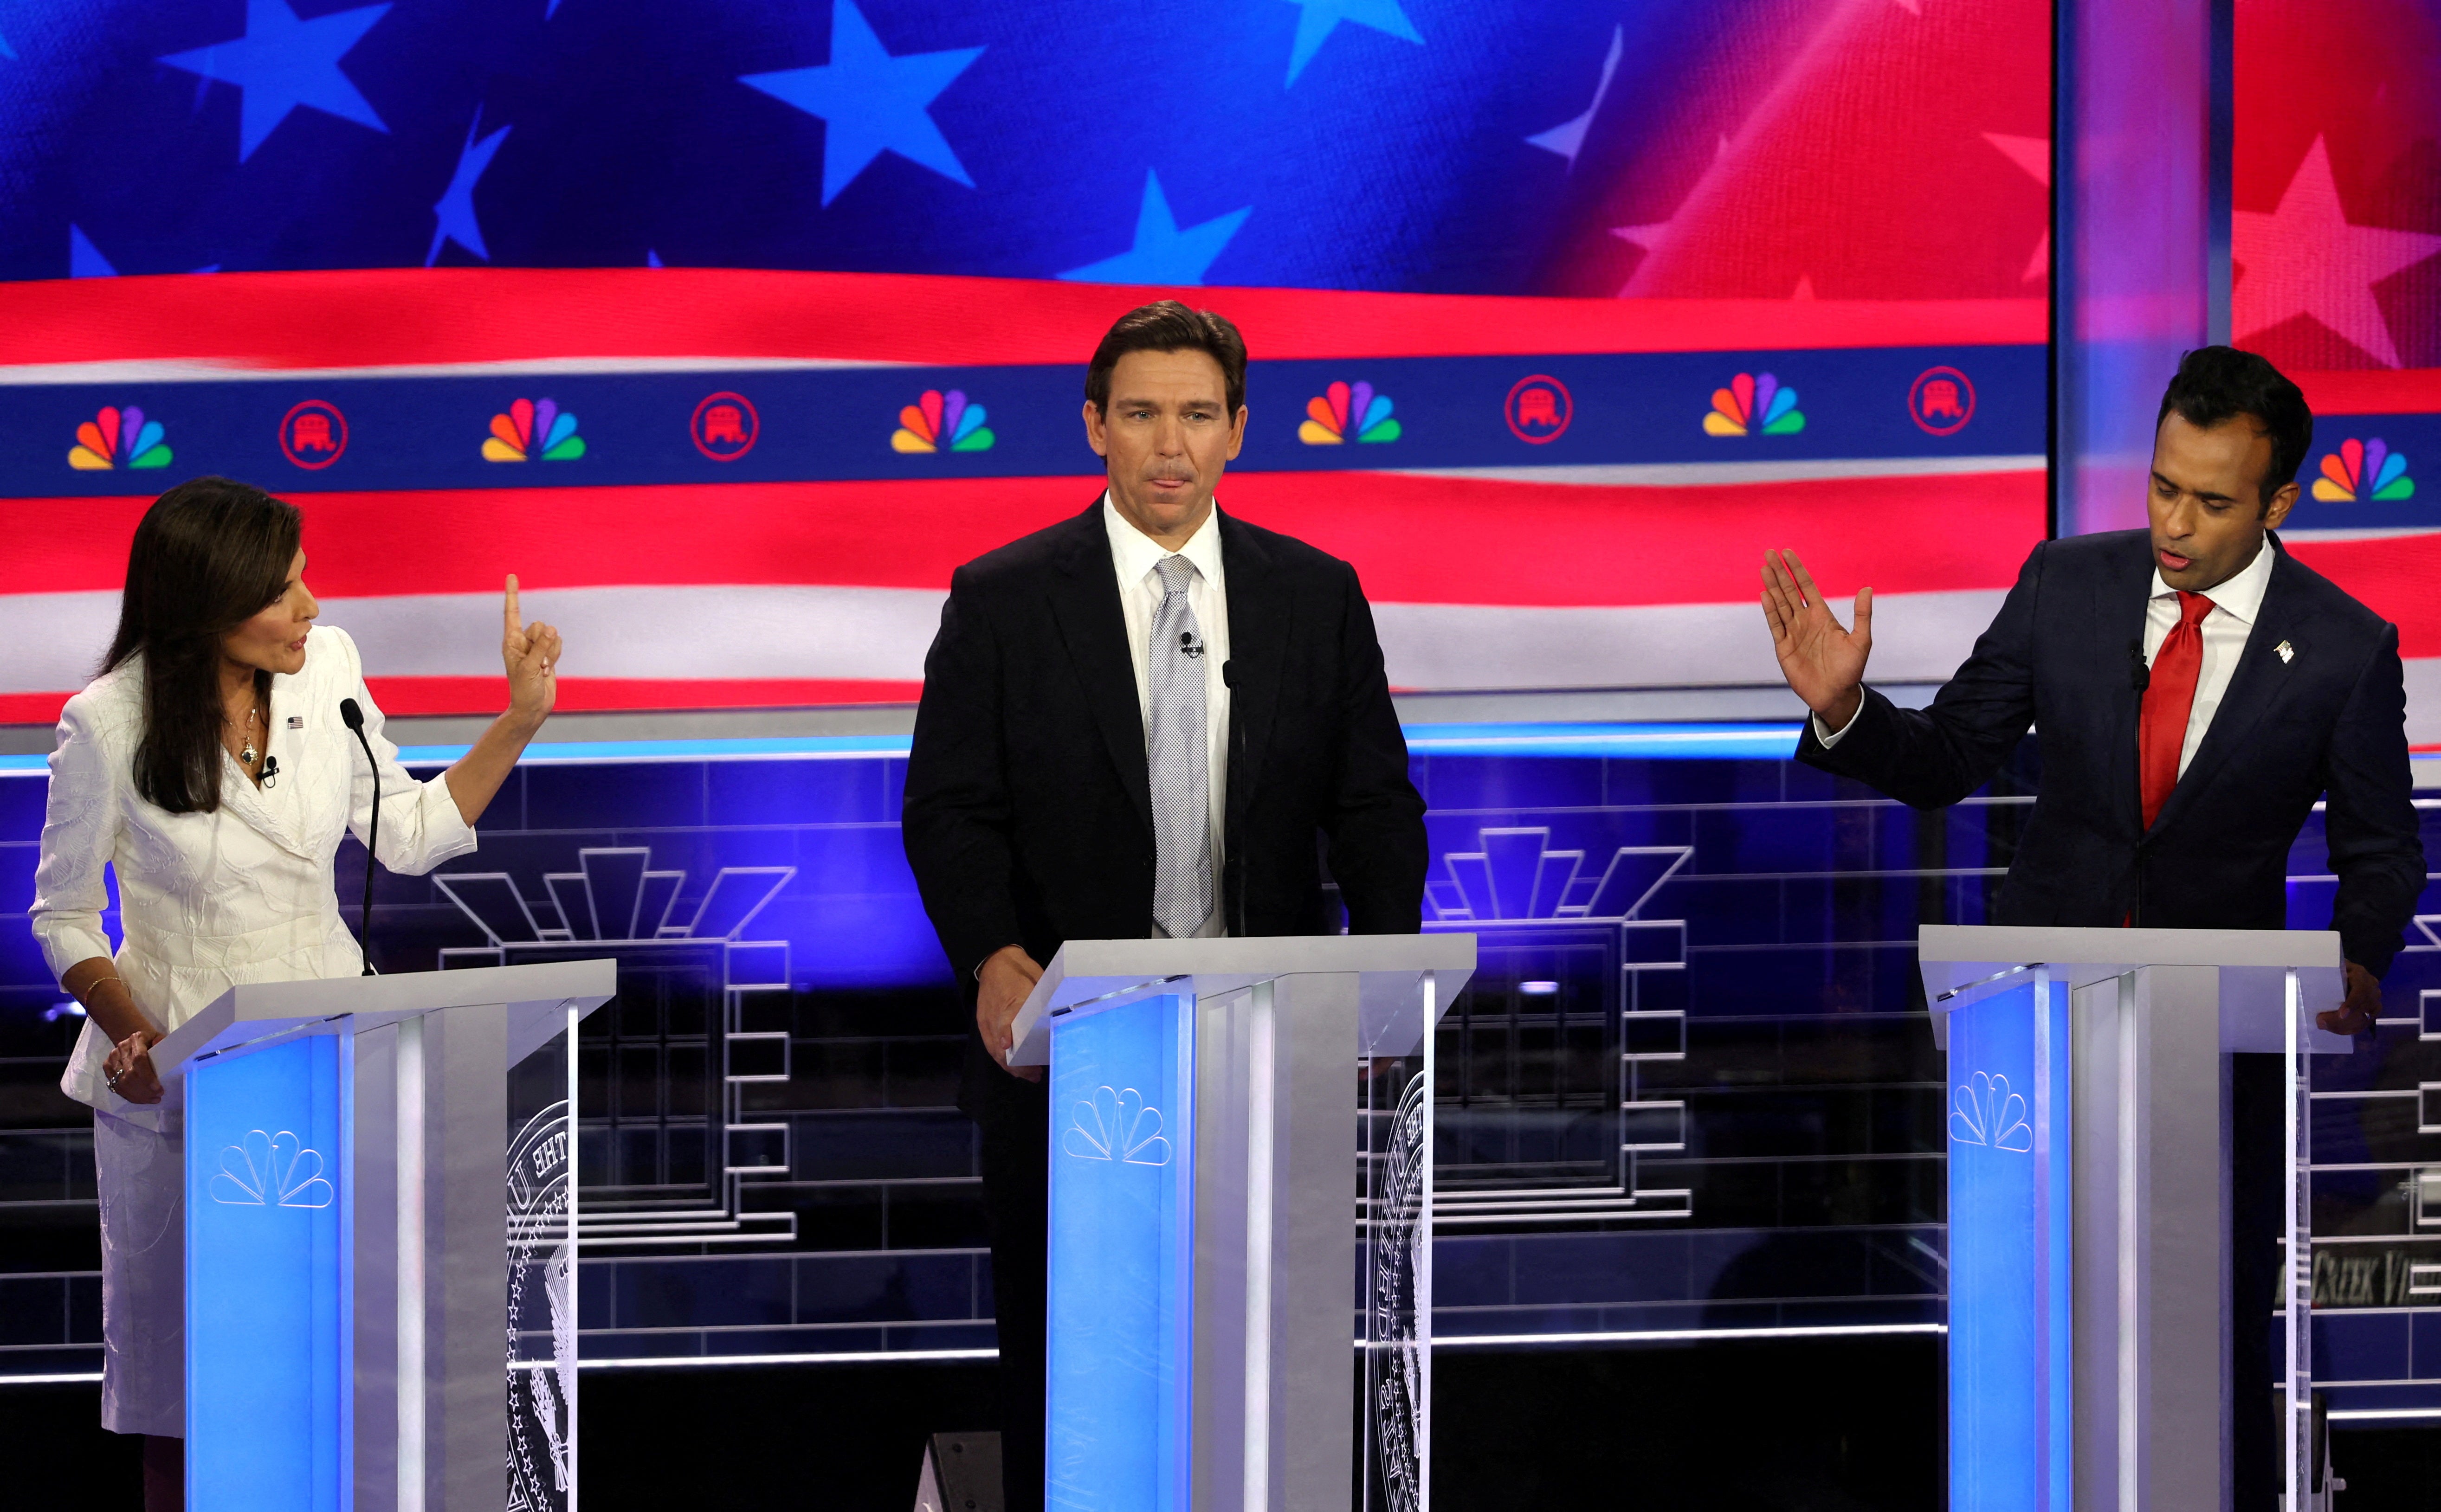 Nikki Haley, Ron DeSantis, and Vivek Ramaswamy have qualified for the fourth GOP primary debate